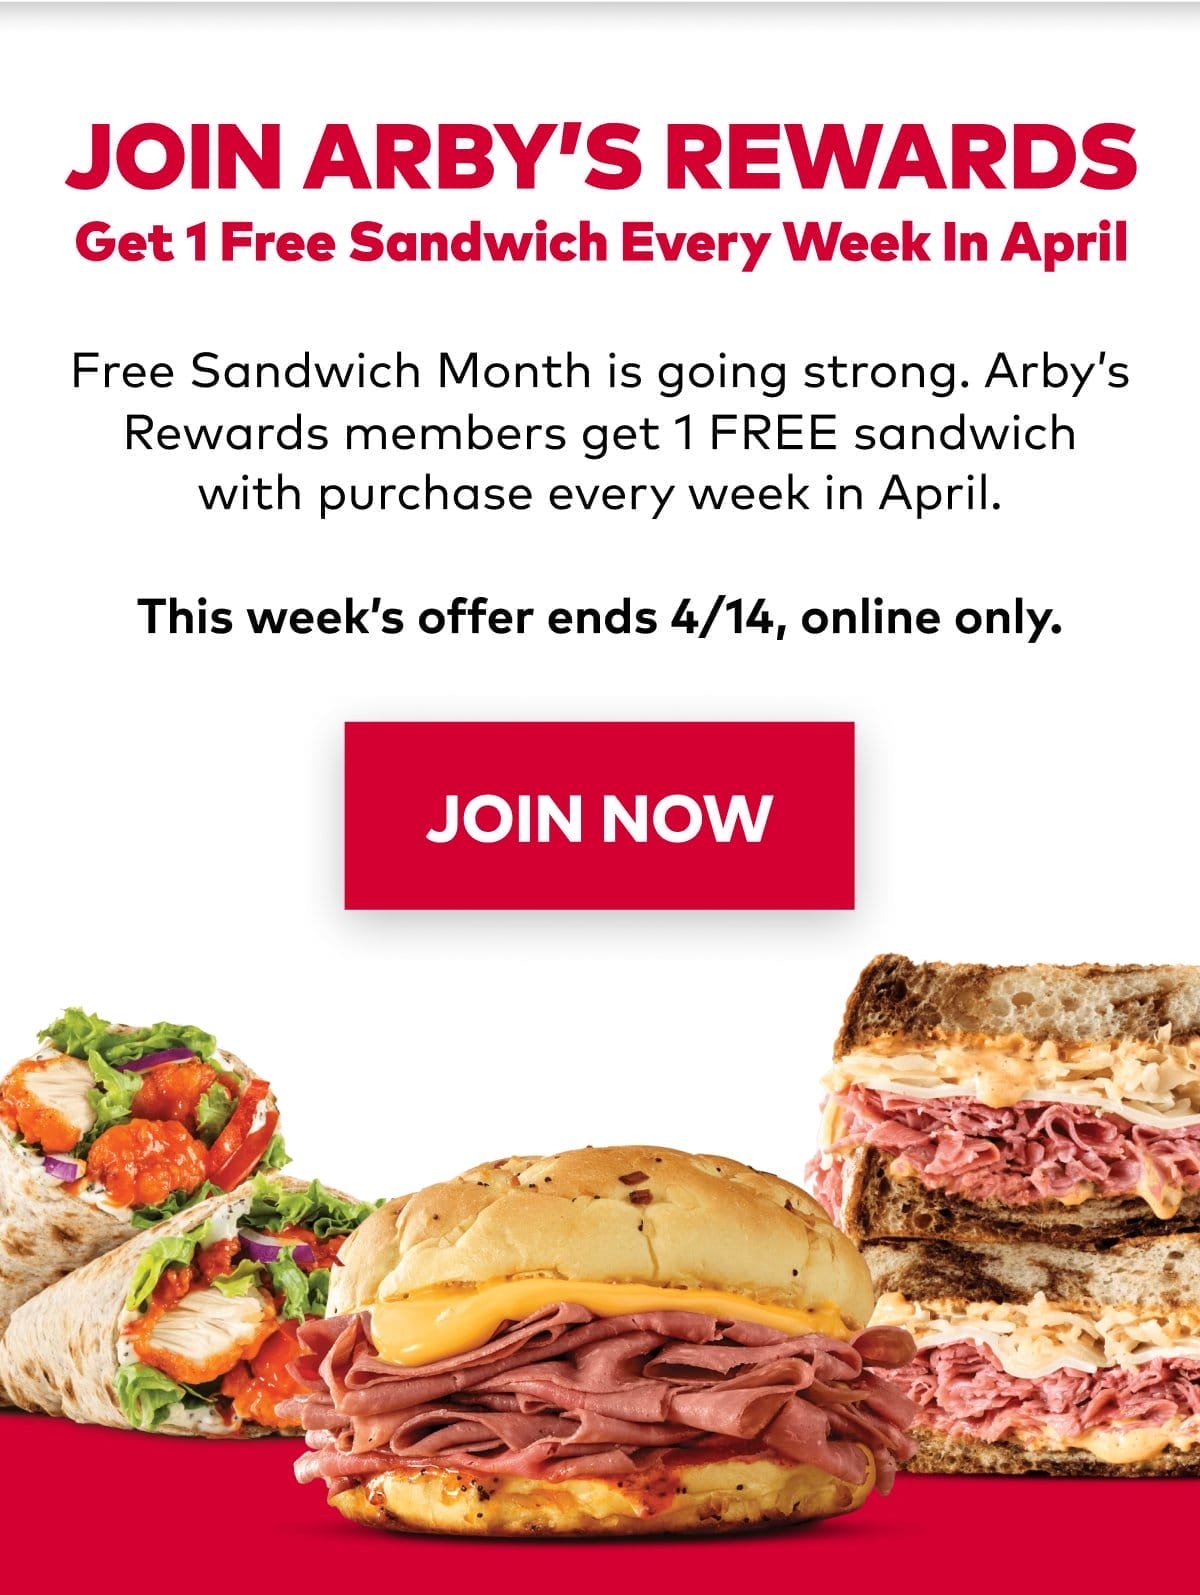 Arby's Free Sandwich Month Online Only